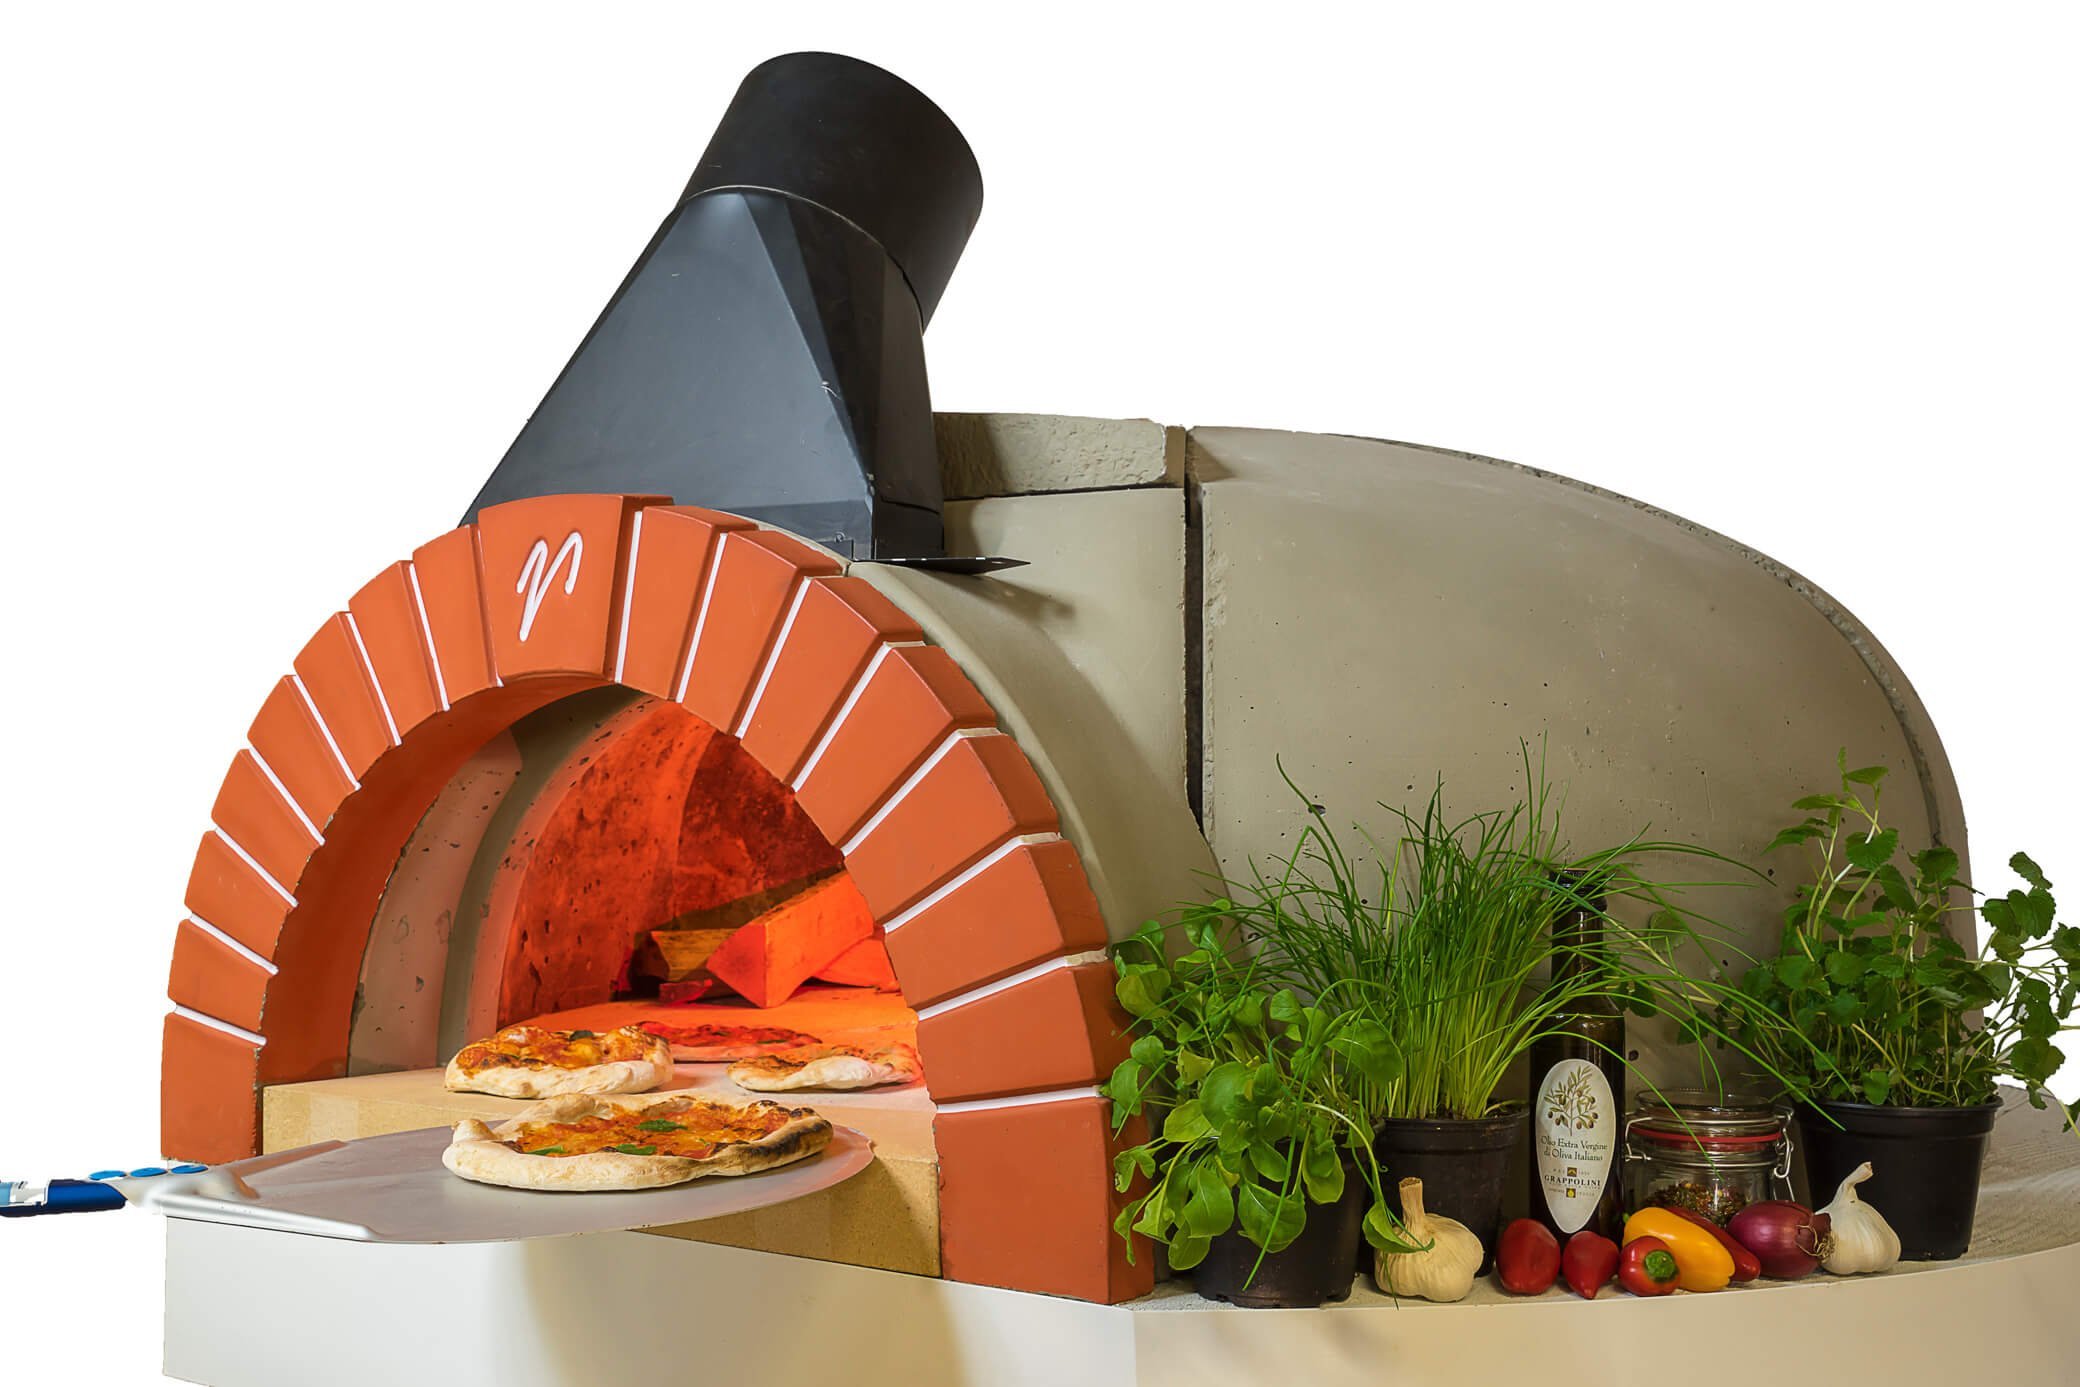 Professional pizza and baking oven, wood firing for continuous firing, Valoriani Vesuvio GR, 90cm